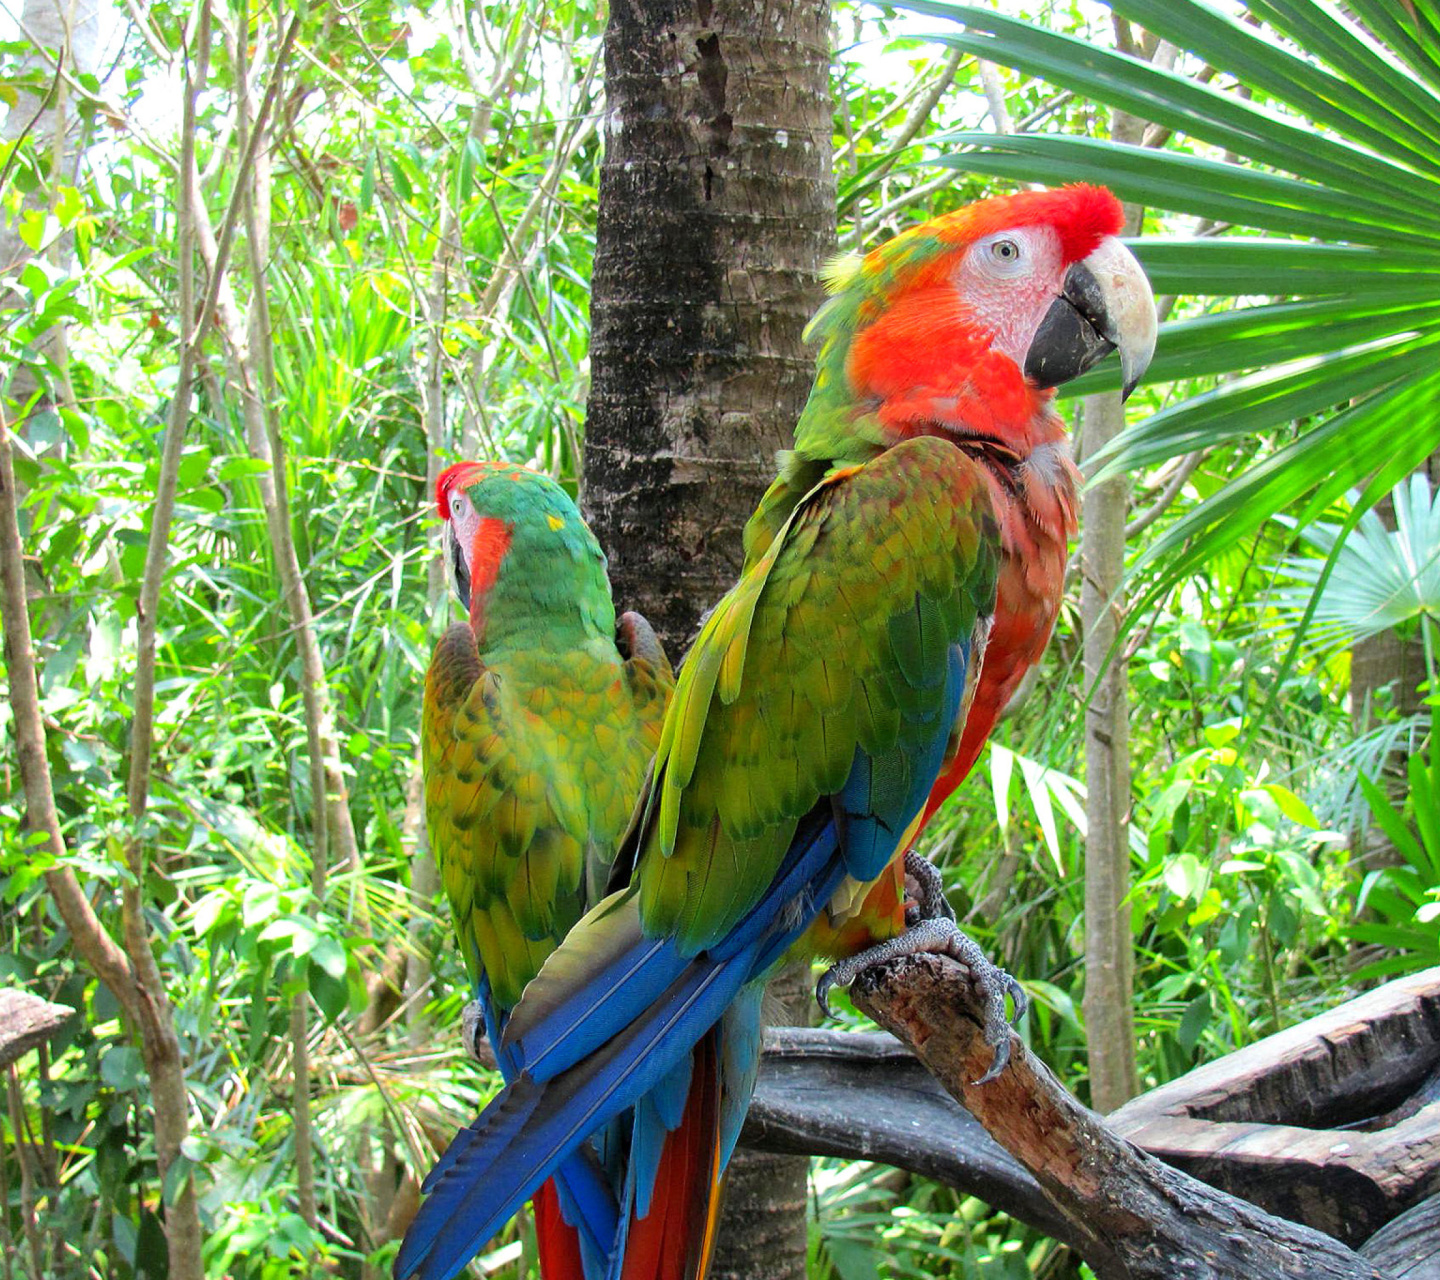 Macaw parrot Amazon forest screenshot #1 1440x1280